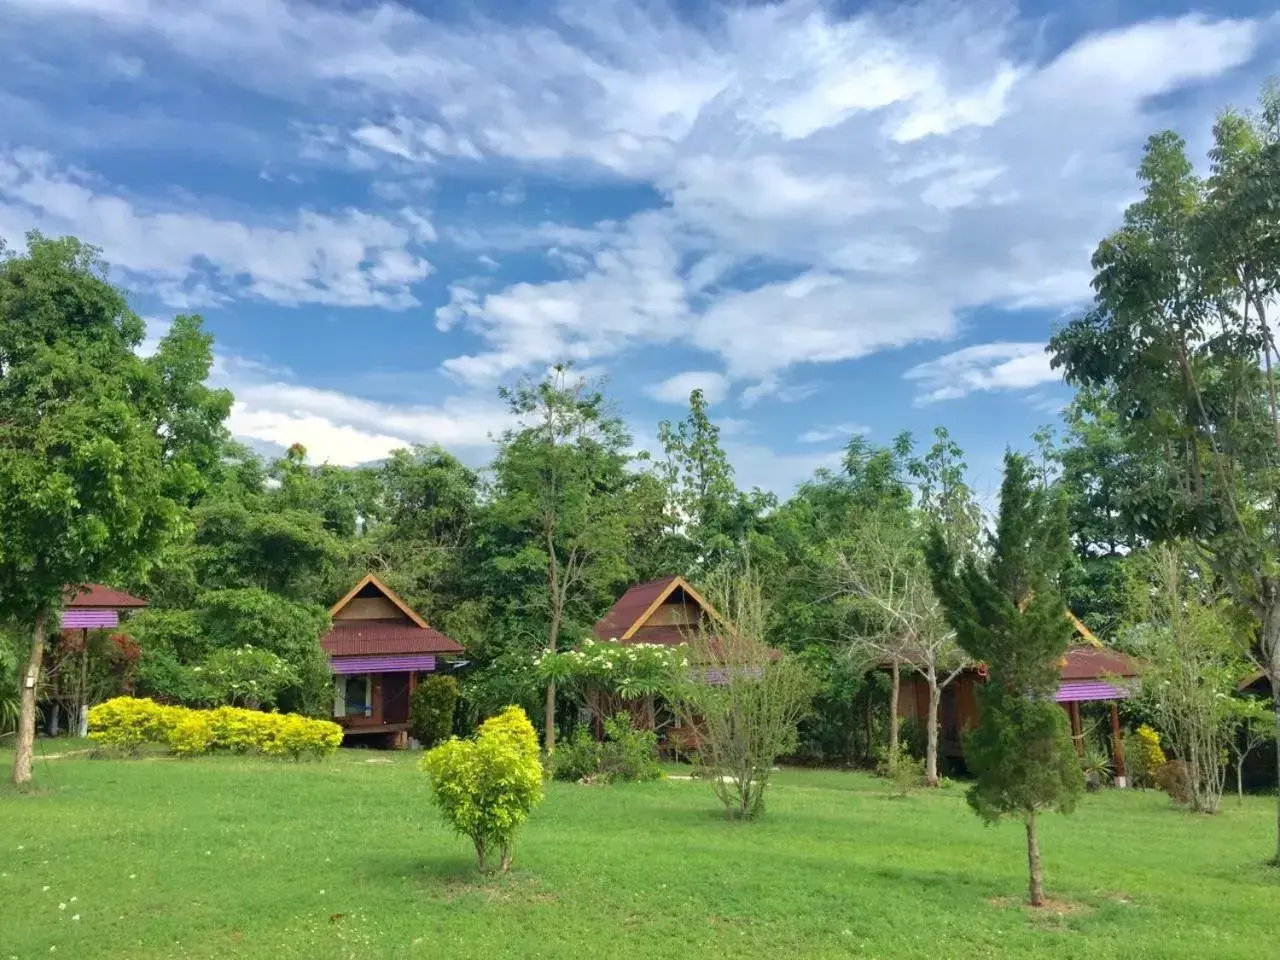 Garden view, Property Building in Romantic Time Mountain Resort